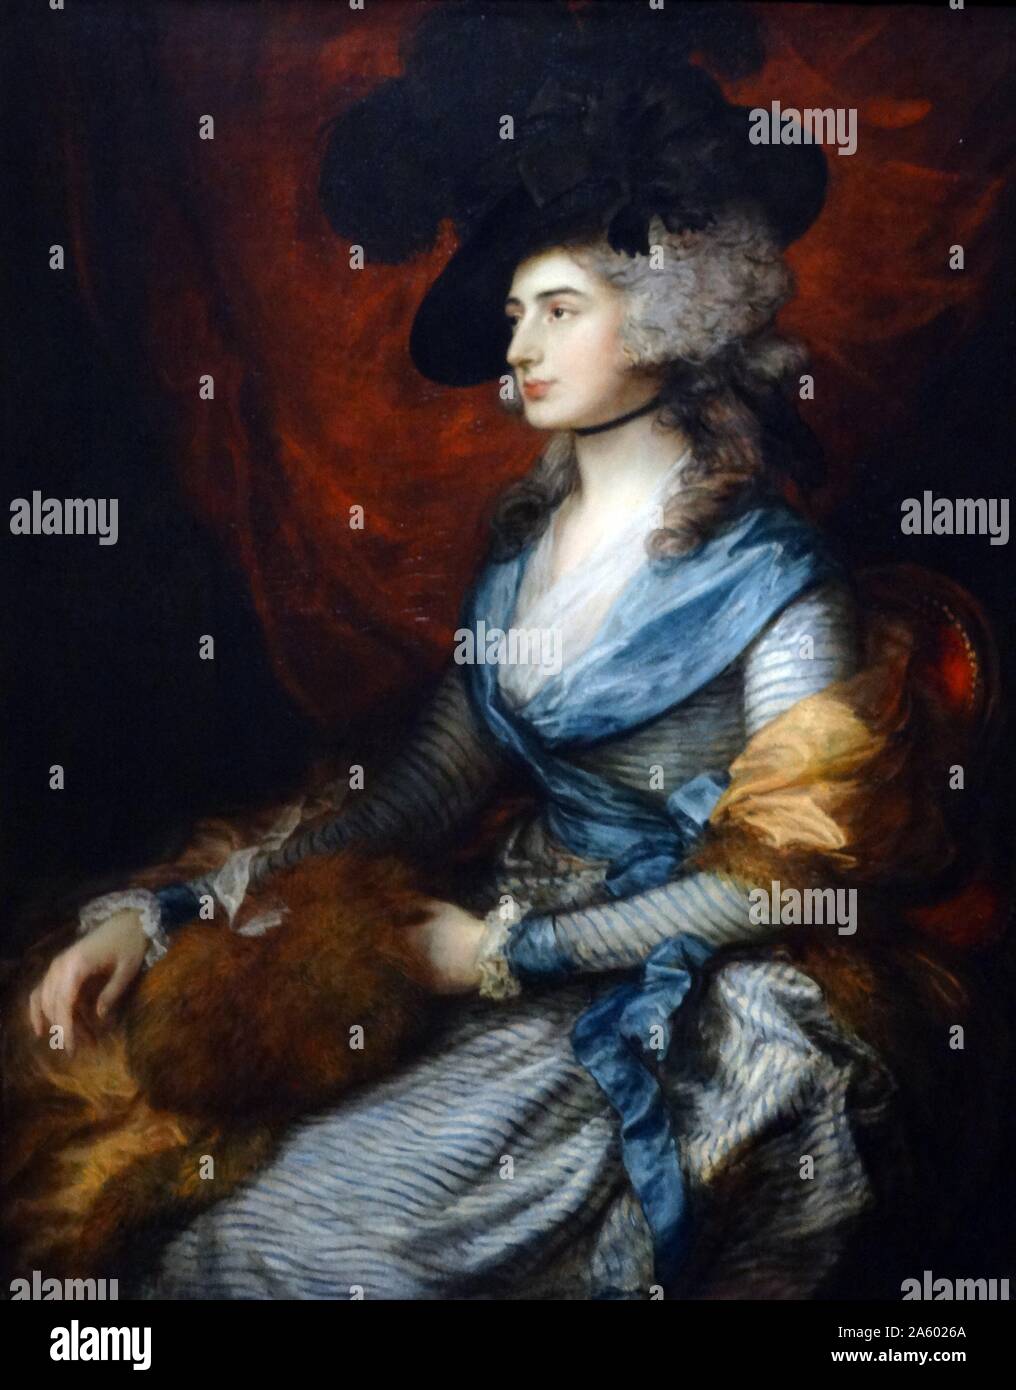 Mrs. Sarah Siddons by Thomas Gainsborough 1785. Sarah Siddons (5 July 1755 – 8 June 1831) was a Welsh-born actress, the best-known tragedienne of the 18th century Stock Photo